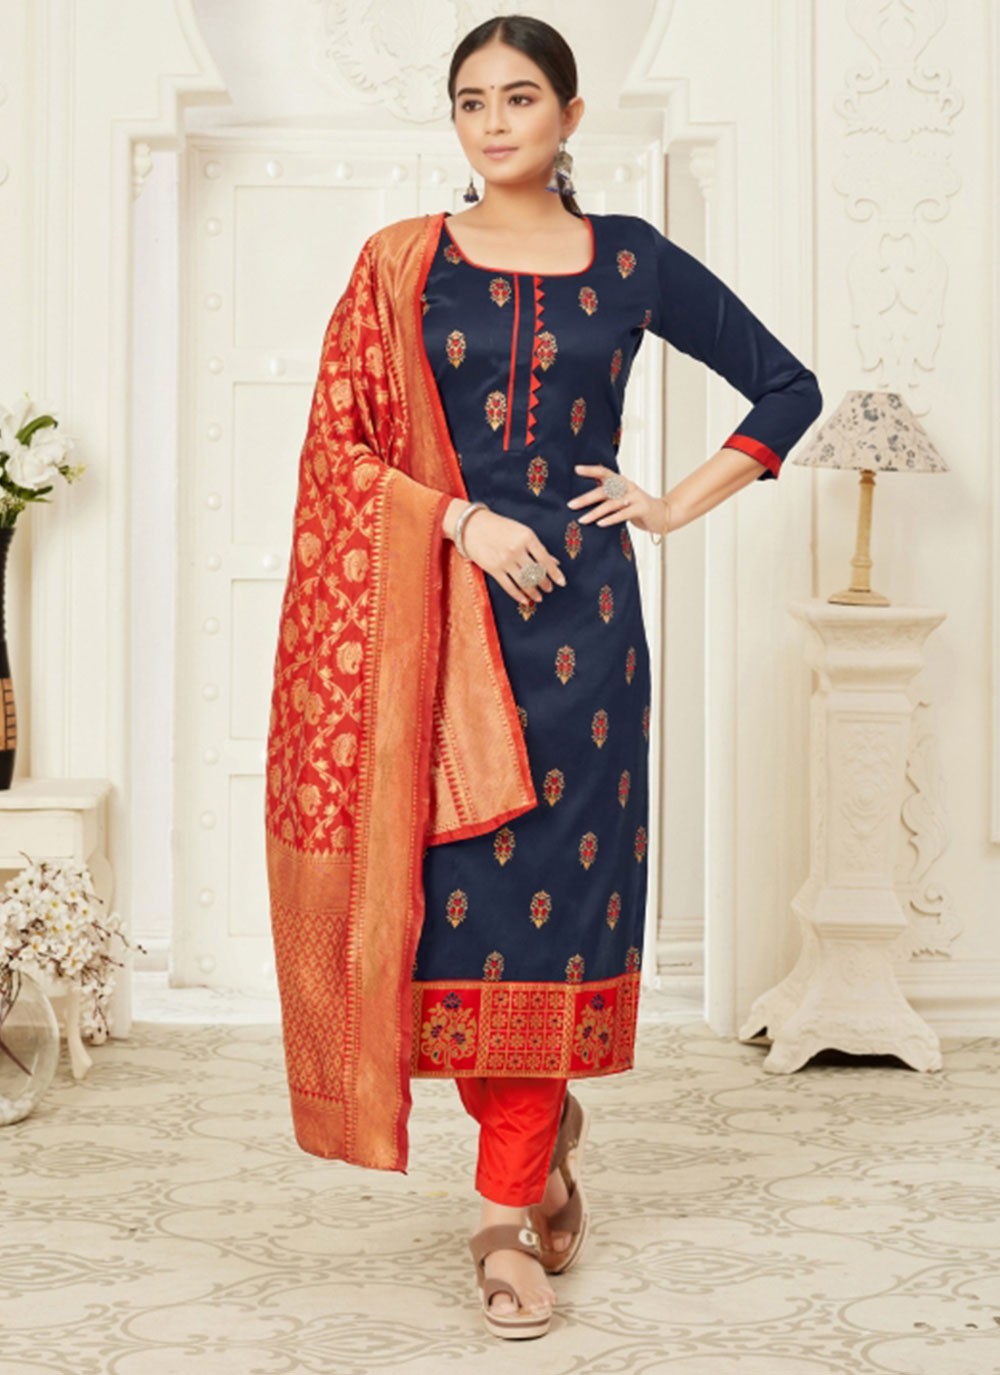 Weaving Cotton Silk Churidar Salwar Suit in Navy Blue and Red